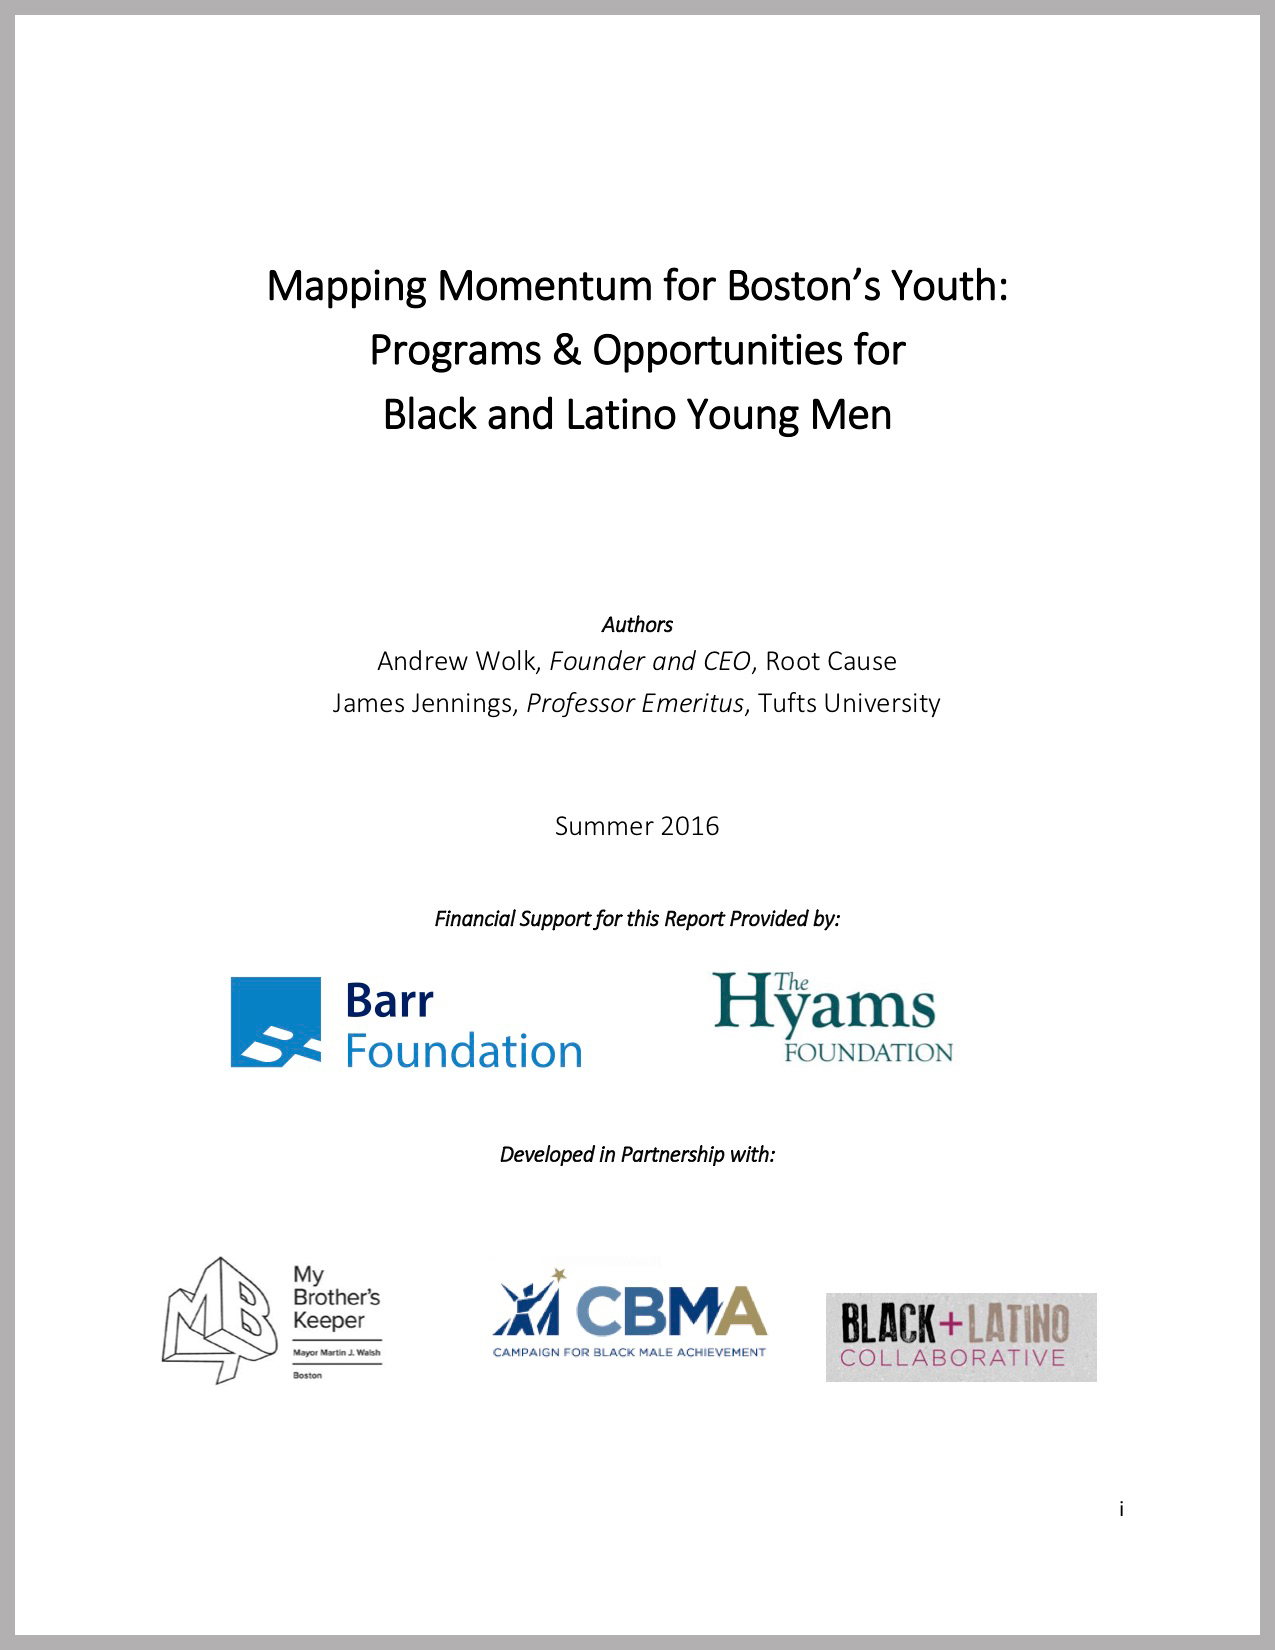 Mapping Momentum for Boston’s Youth: Programs & Opportunities for Black and Latino Young Men